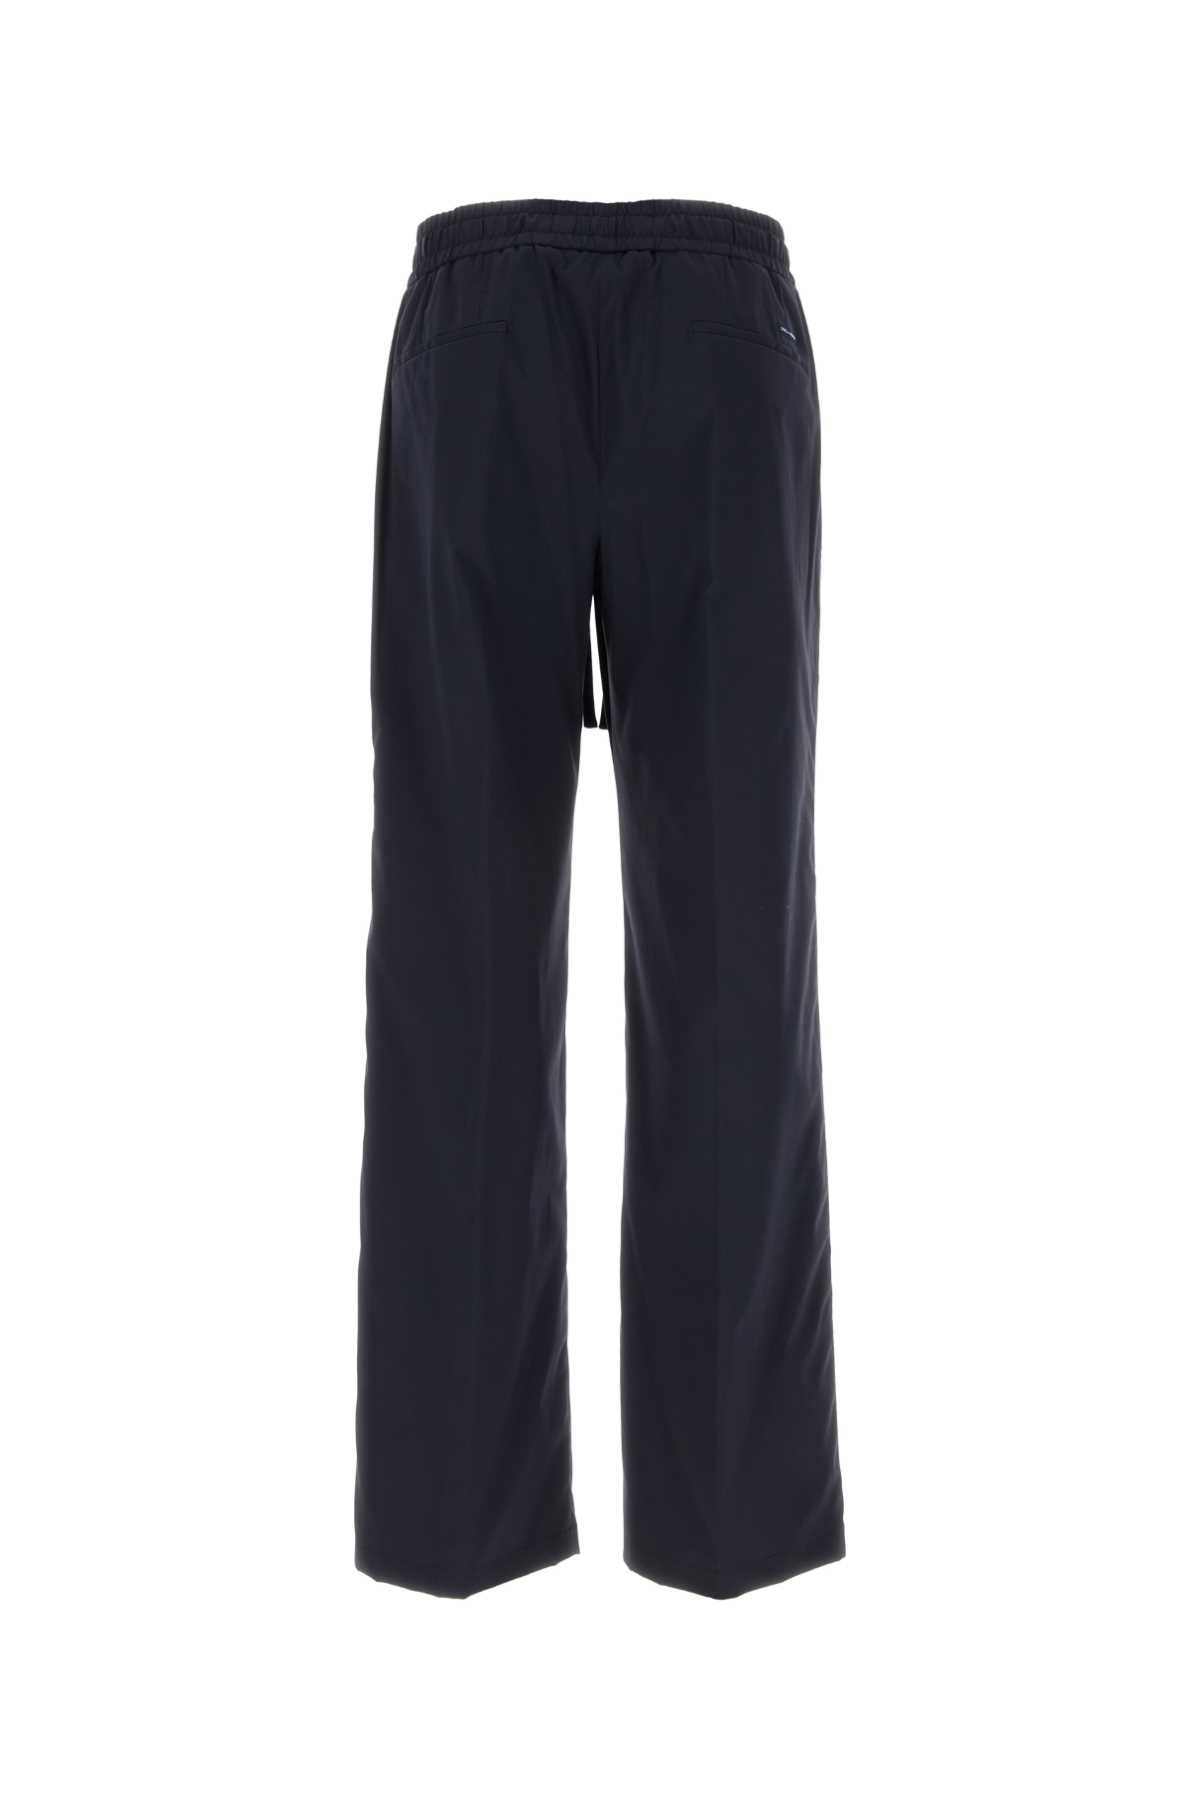 Dolce & Gabbana Navy Blue Stretch Nylon Pant In Bluscurissimo5